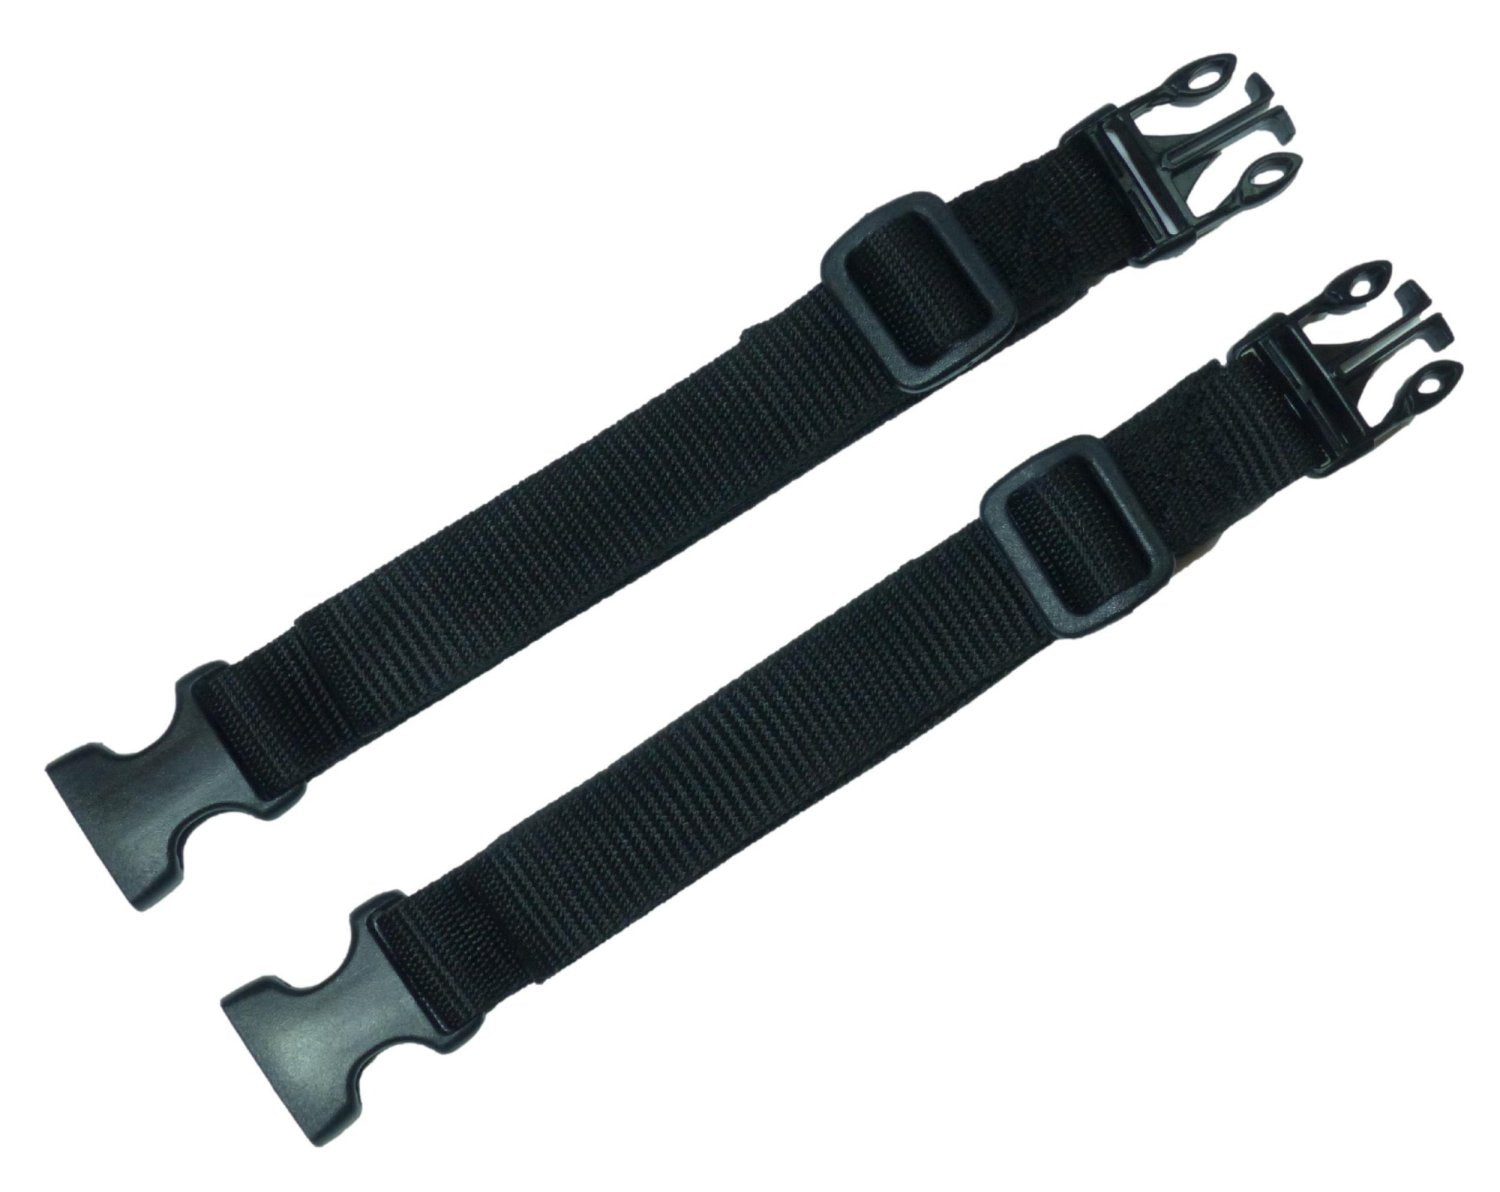 Benristraps 25mm Webbing Strap with Quick Release & Length-Adjusting Buckles (Pair) in black